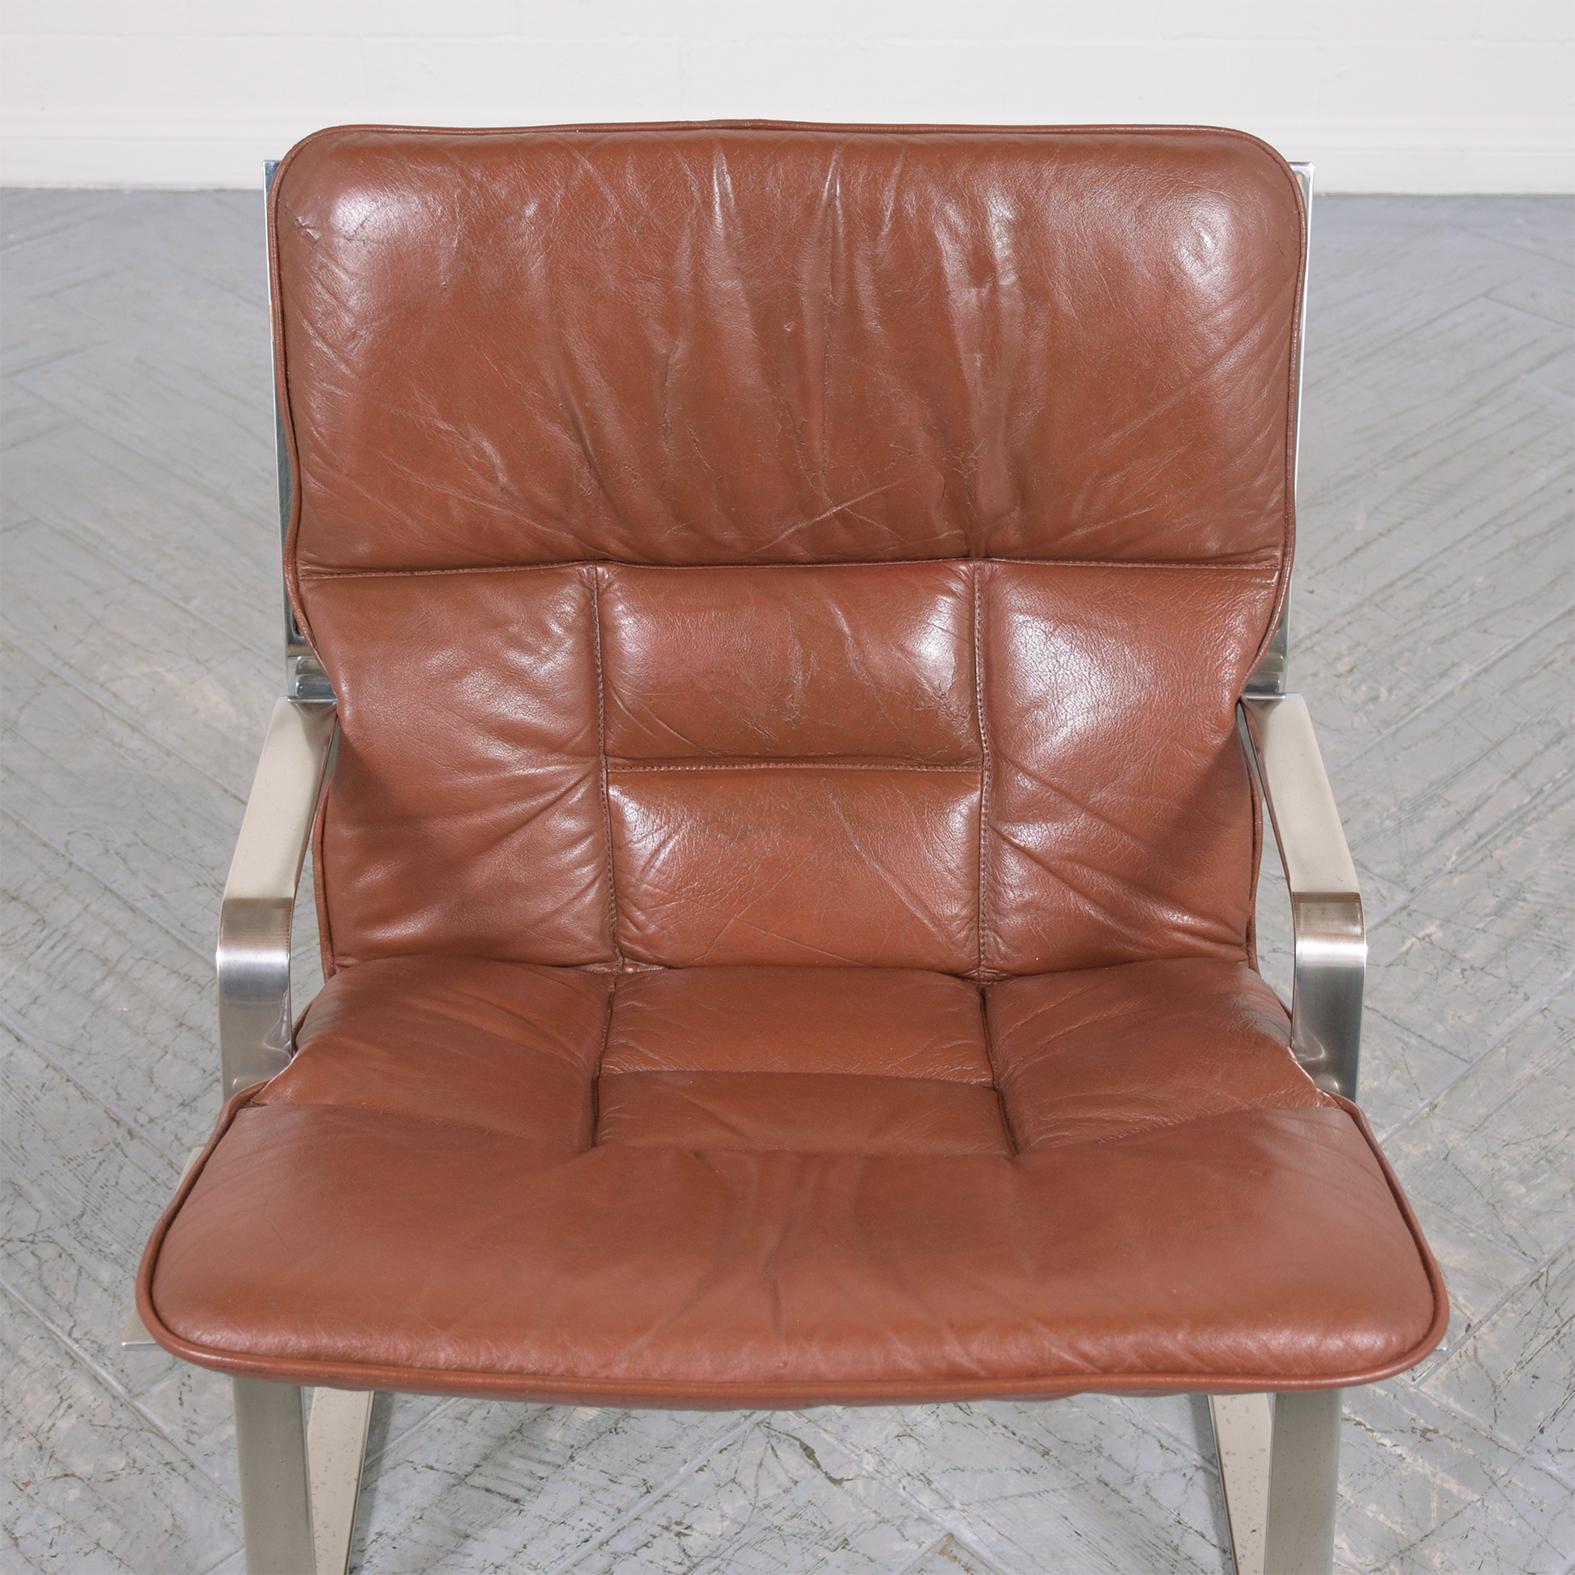 Patinated Restored Elsa & Nordahl Solheim Mid-Century Modern Leather Chrome Lounge Chairs